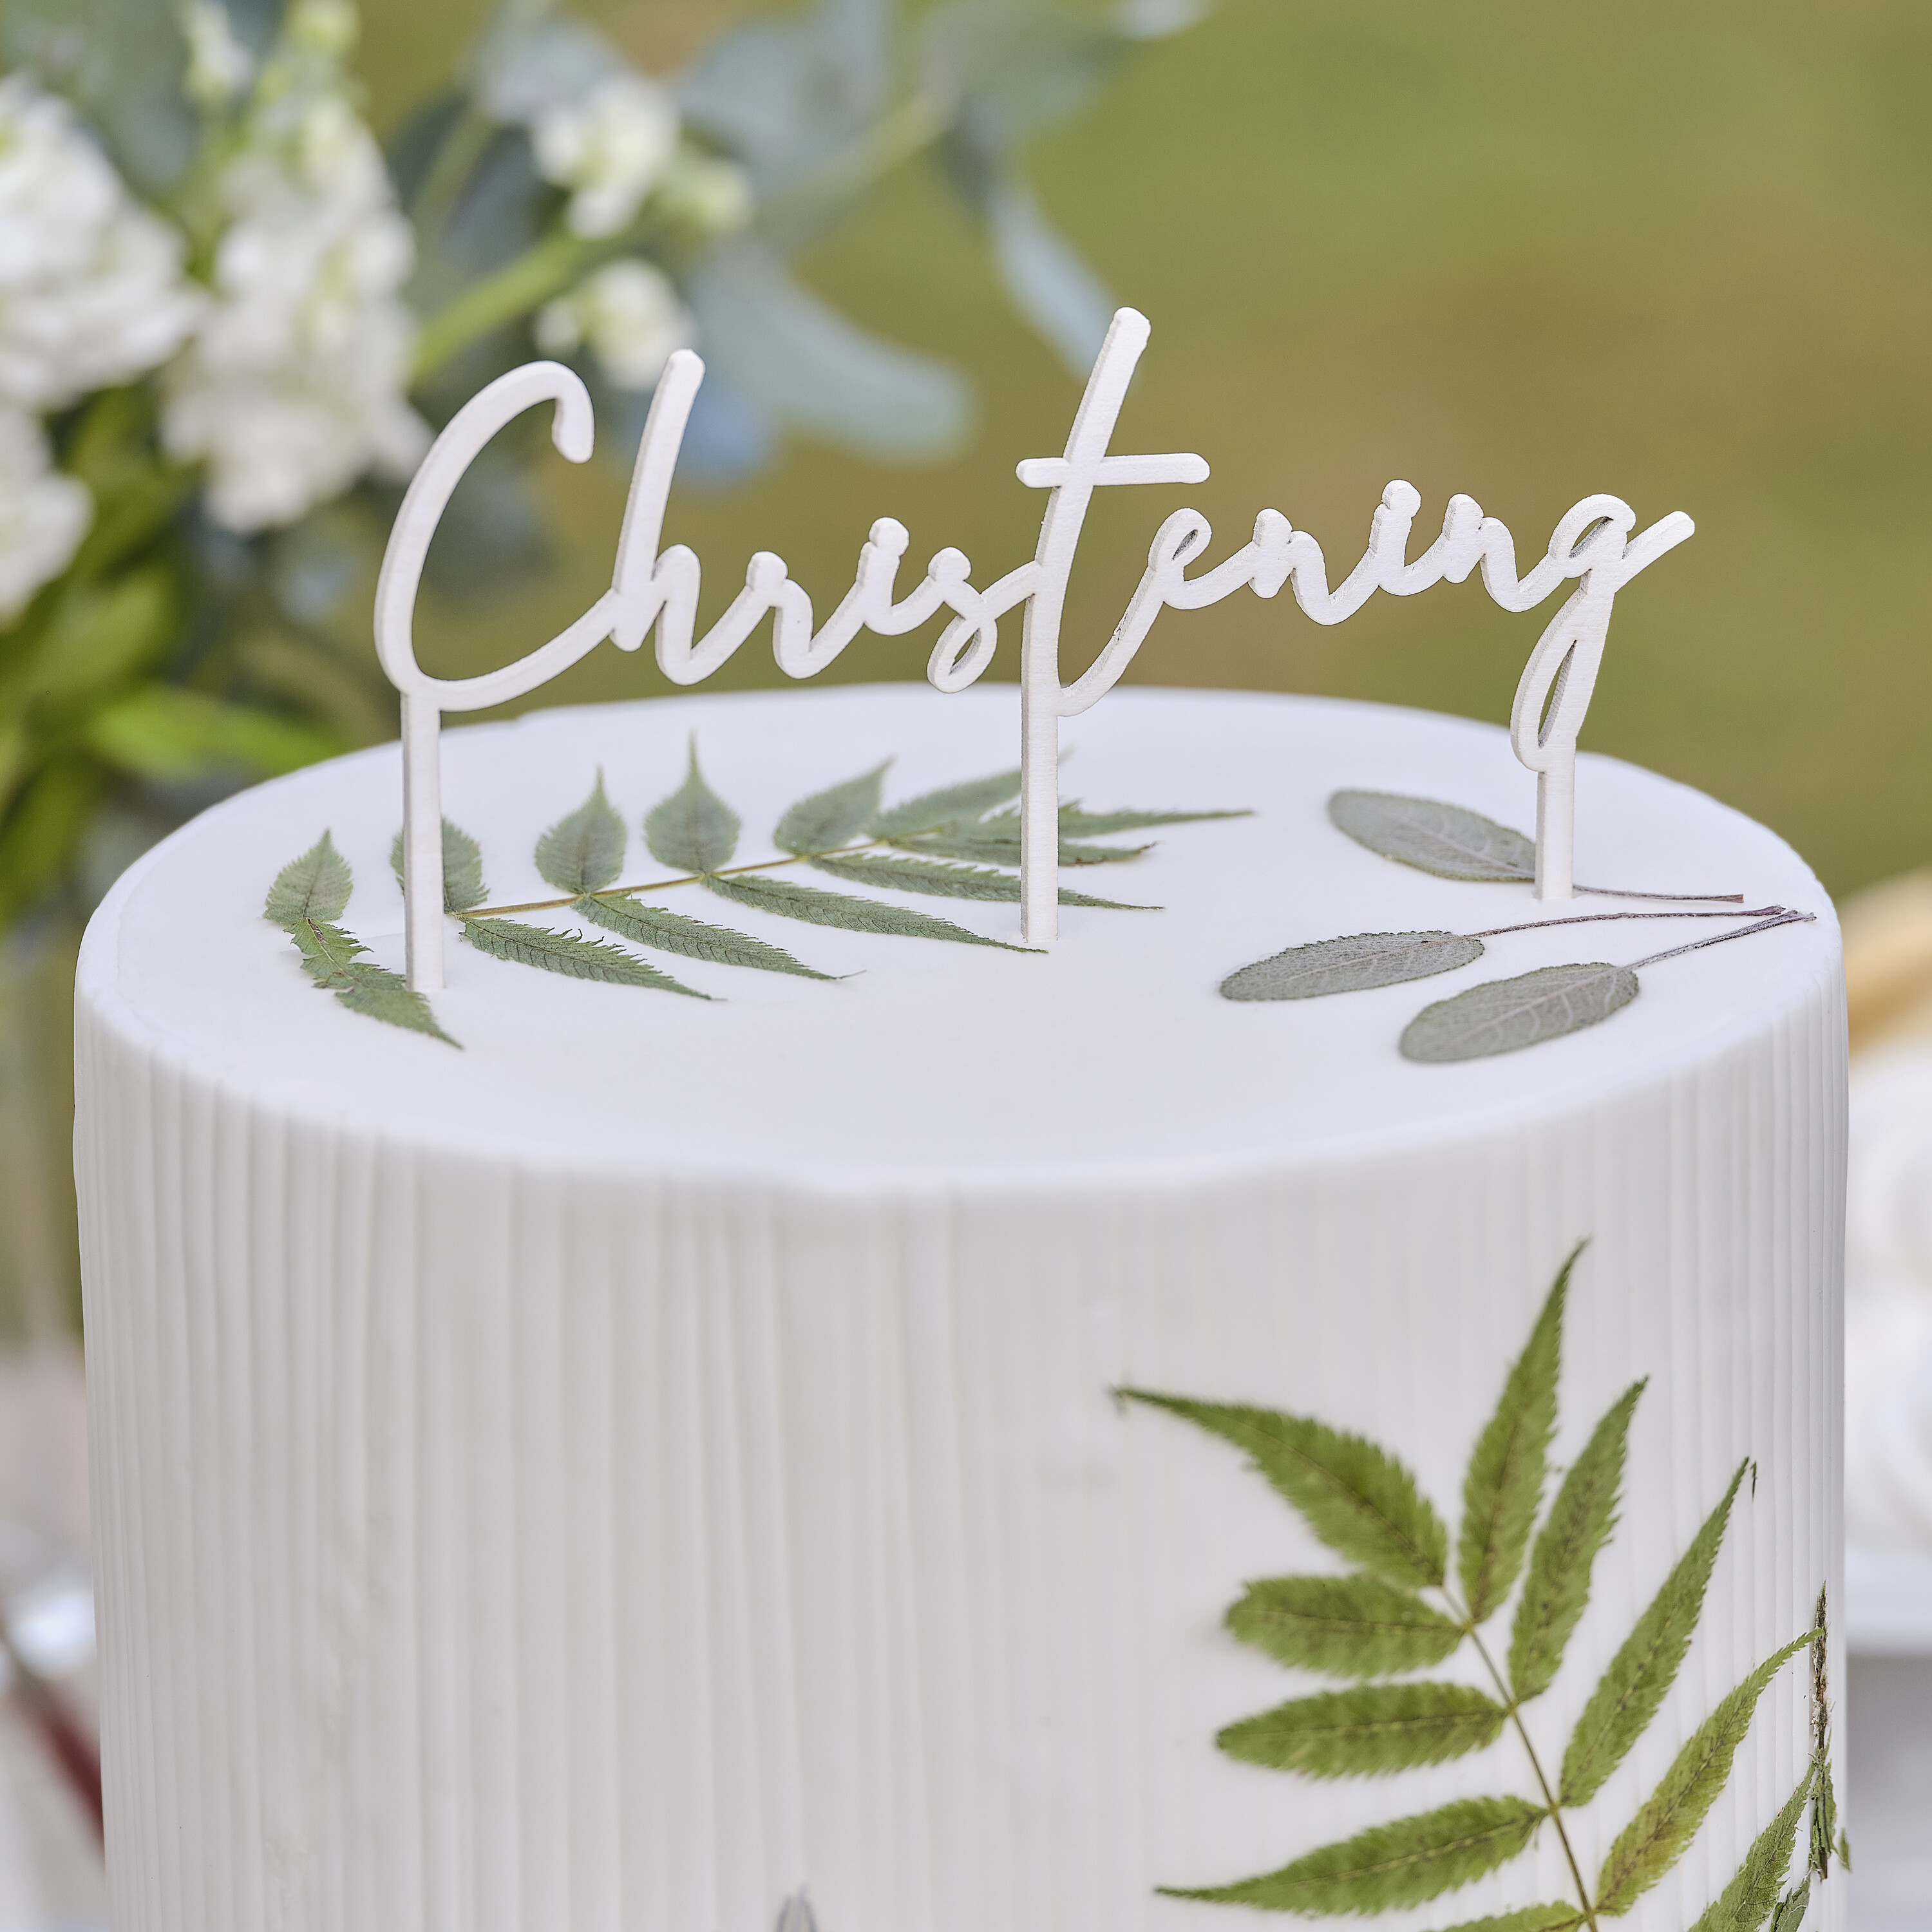 Baptism Cake Topper ⋆ Papermoon